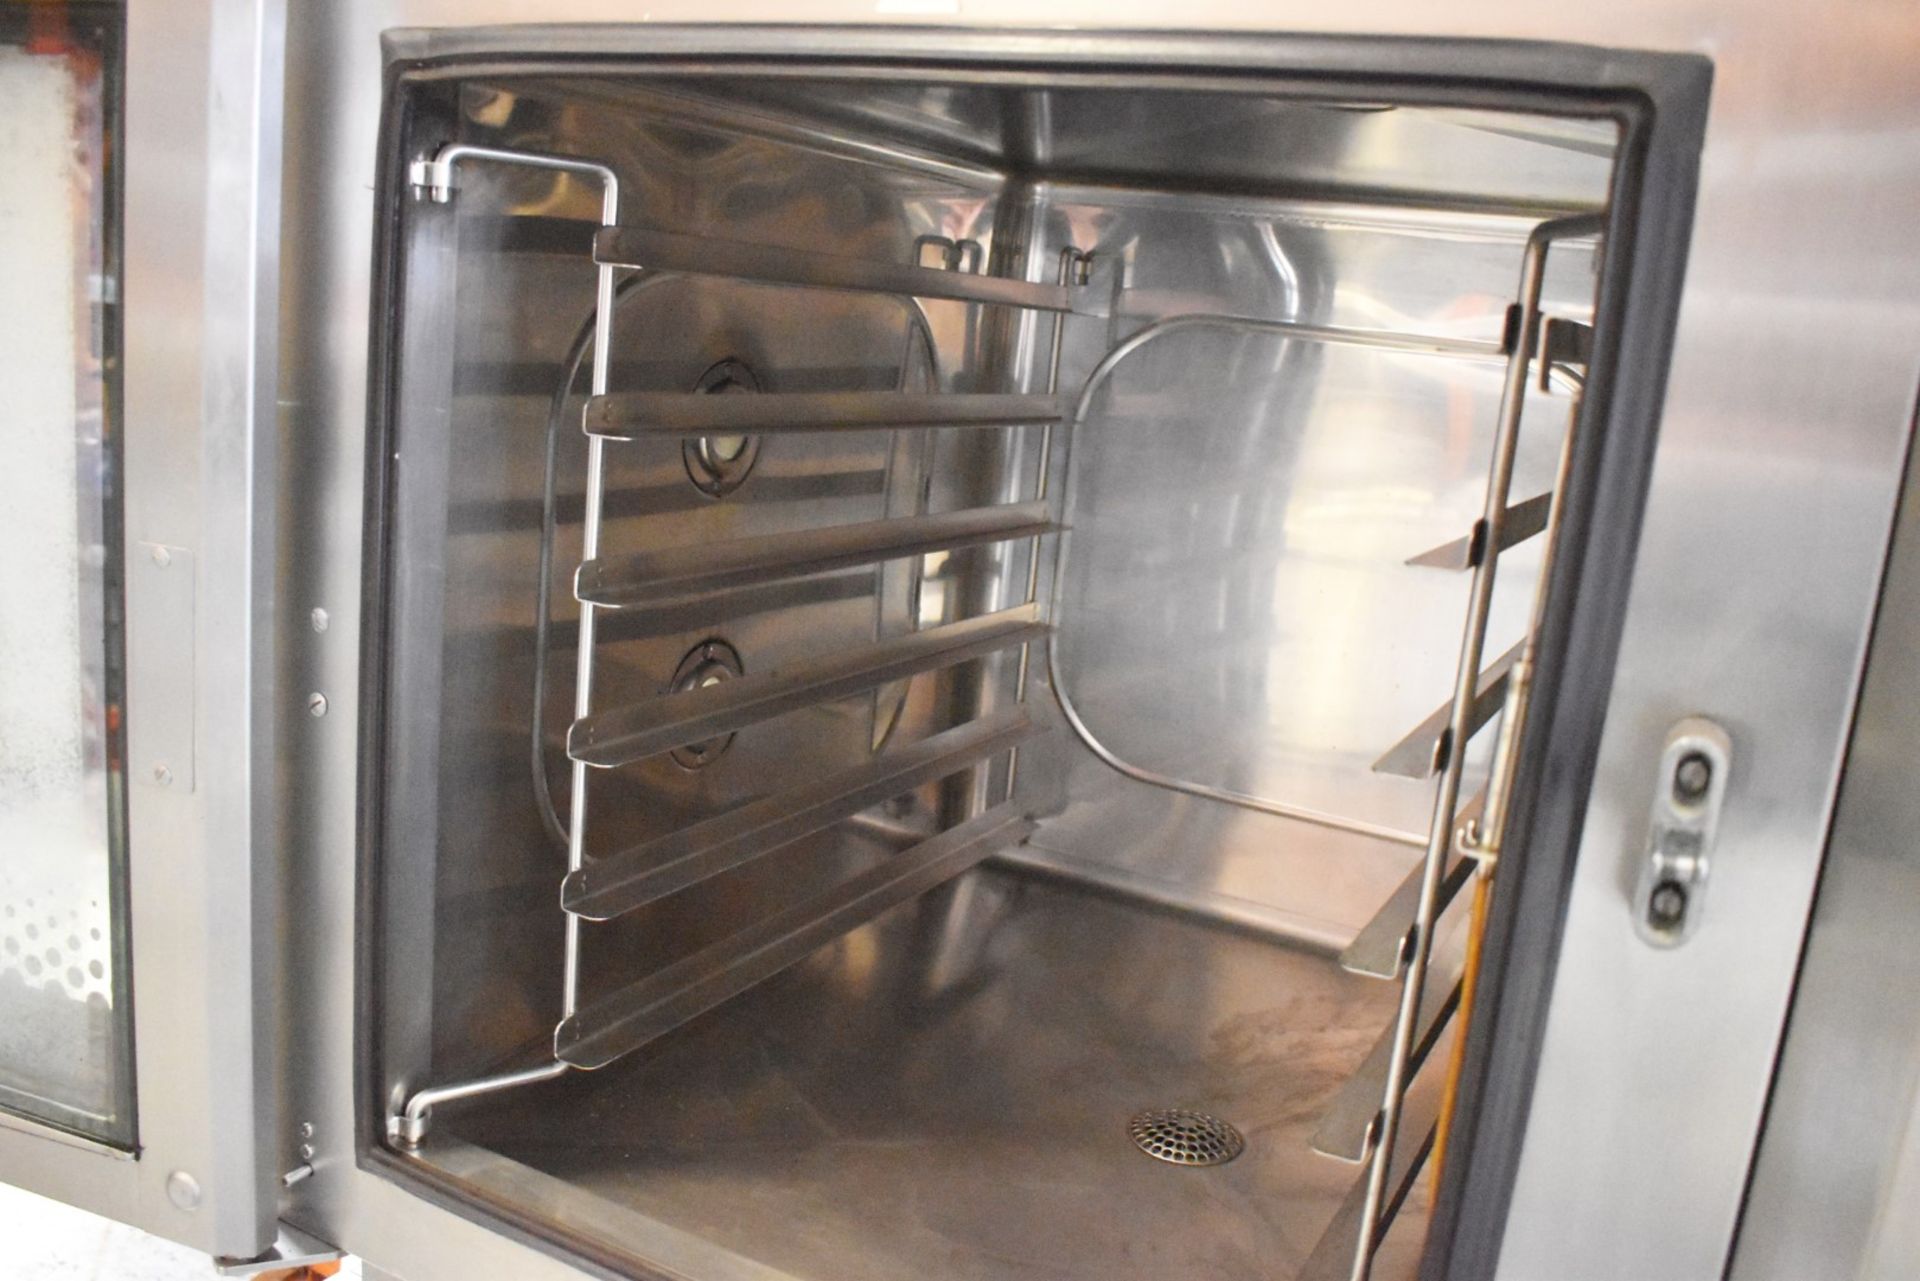 1 x Leventi Combimat Mastermind Steamer Oven - 6 Grid - 3 Phase - Includes Mobile Pedestal Base With - Image 8 of 14